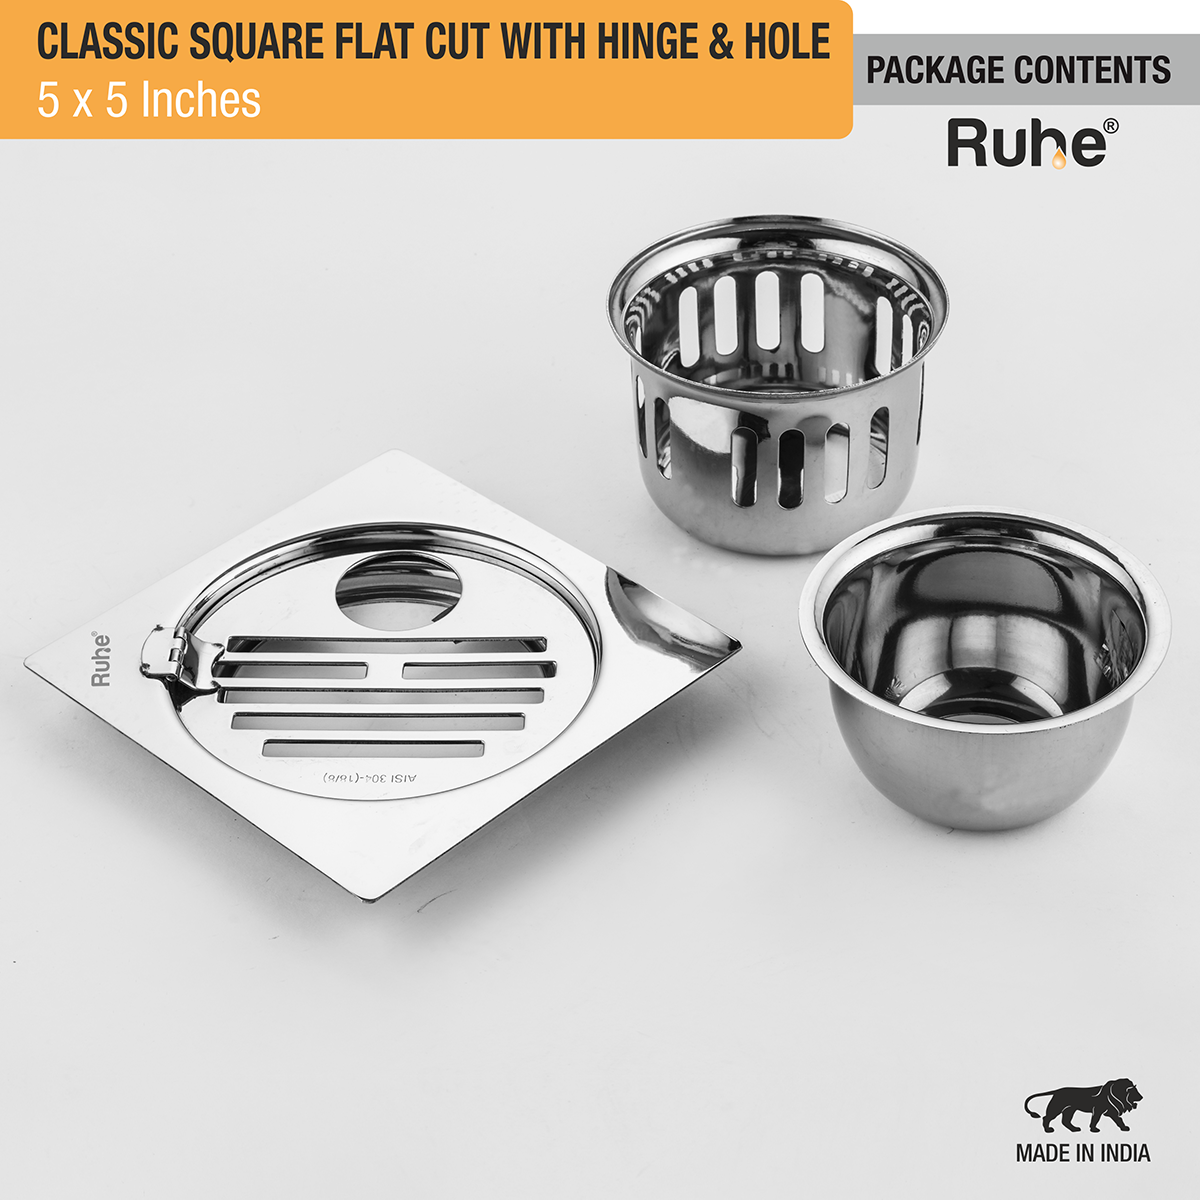 Classic Square Flat Cut Floor Drain (5 x 5 Inches) with Hinge, Hole and Cockroach Trap (304 Grade) package content